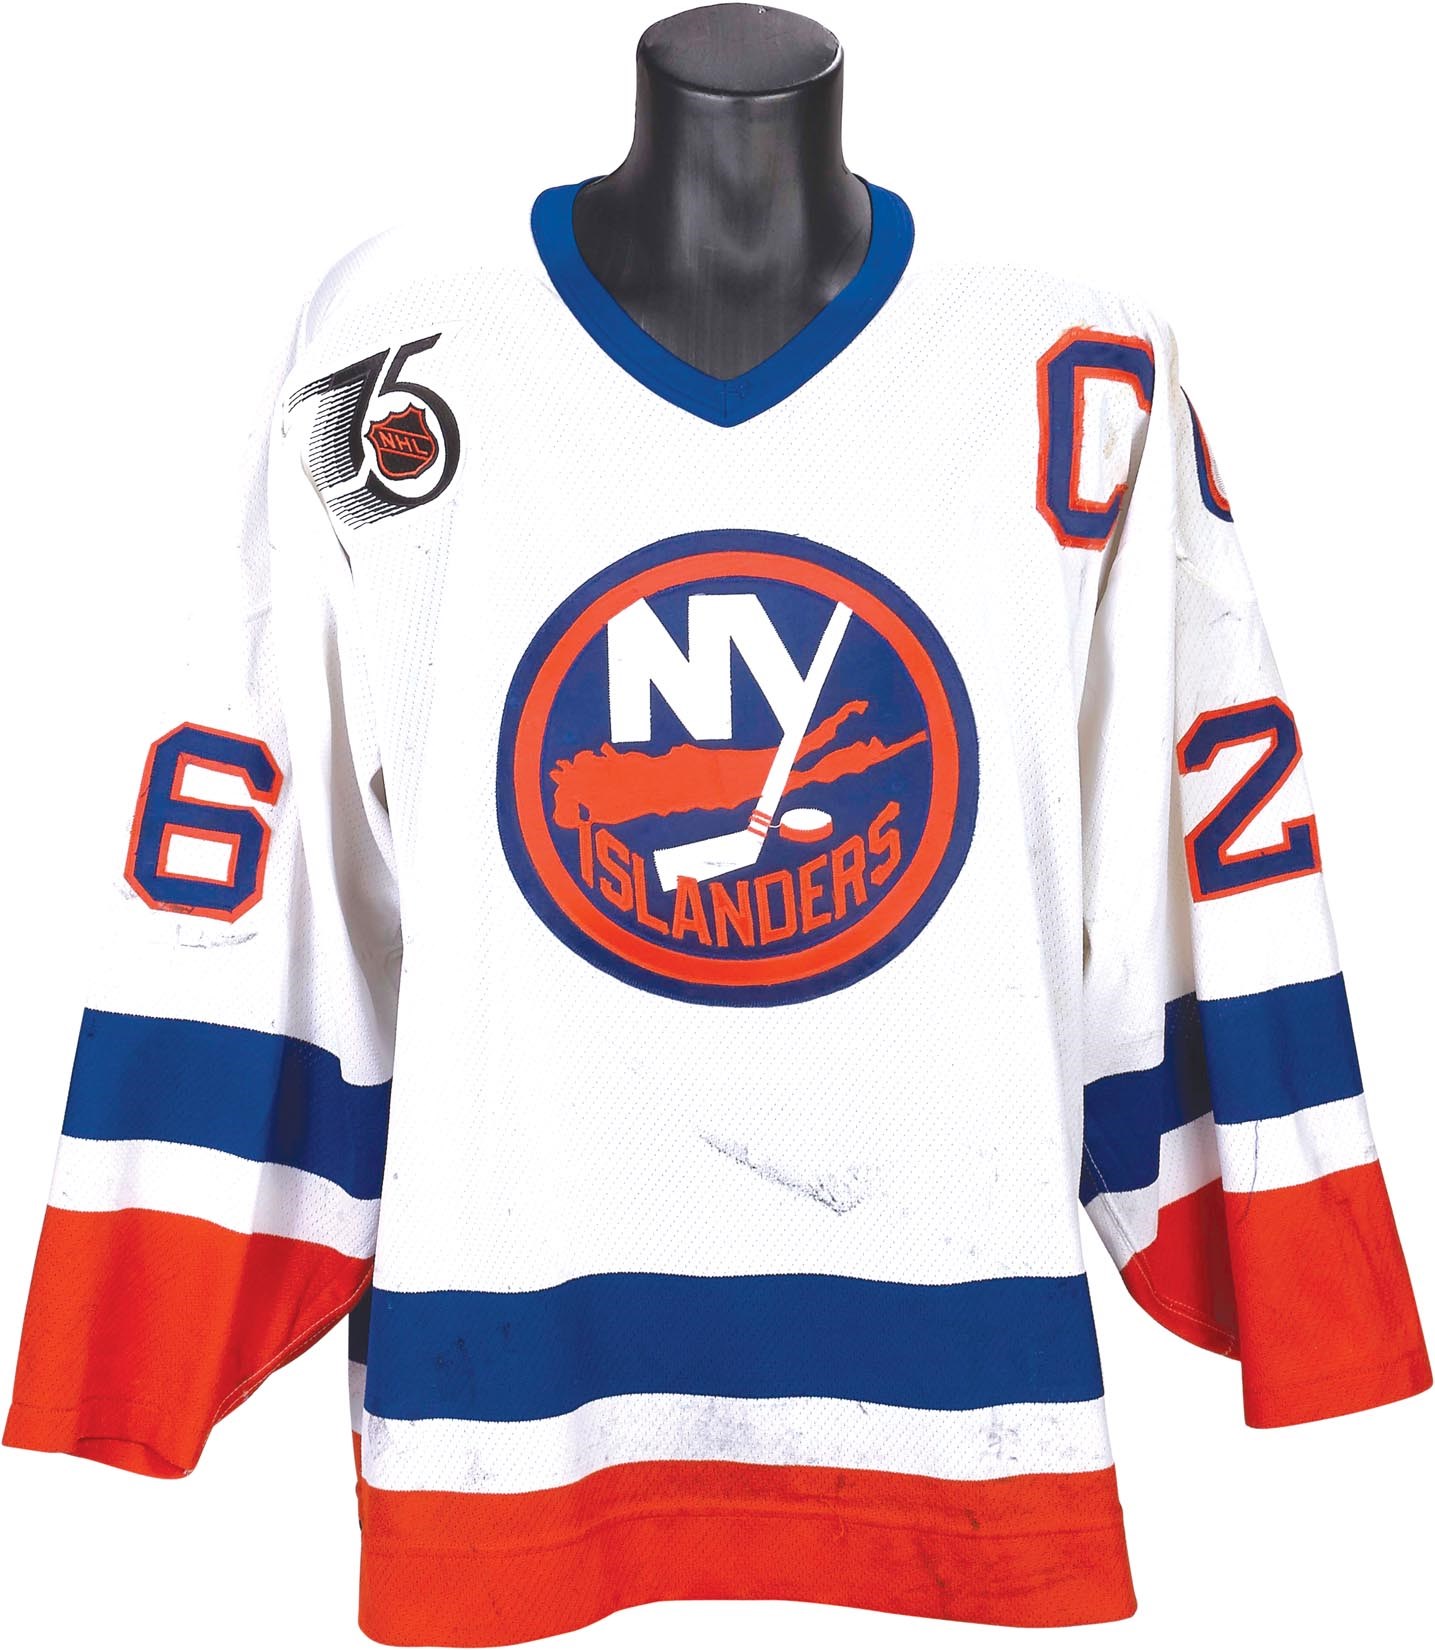 Hockey - 1991-92 Pat Flatley "Hammered" Game Worn Islanders Jersey w/20th Anniversary Patch (Photo-Matched)